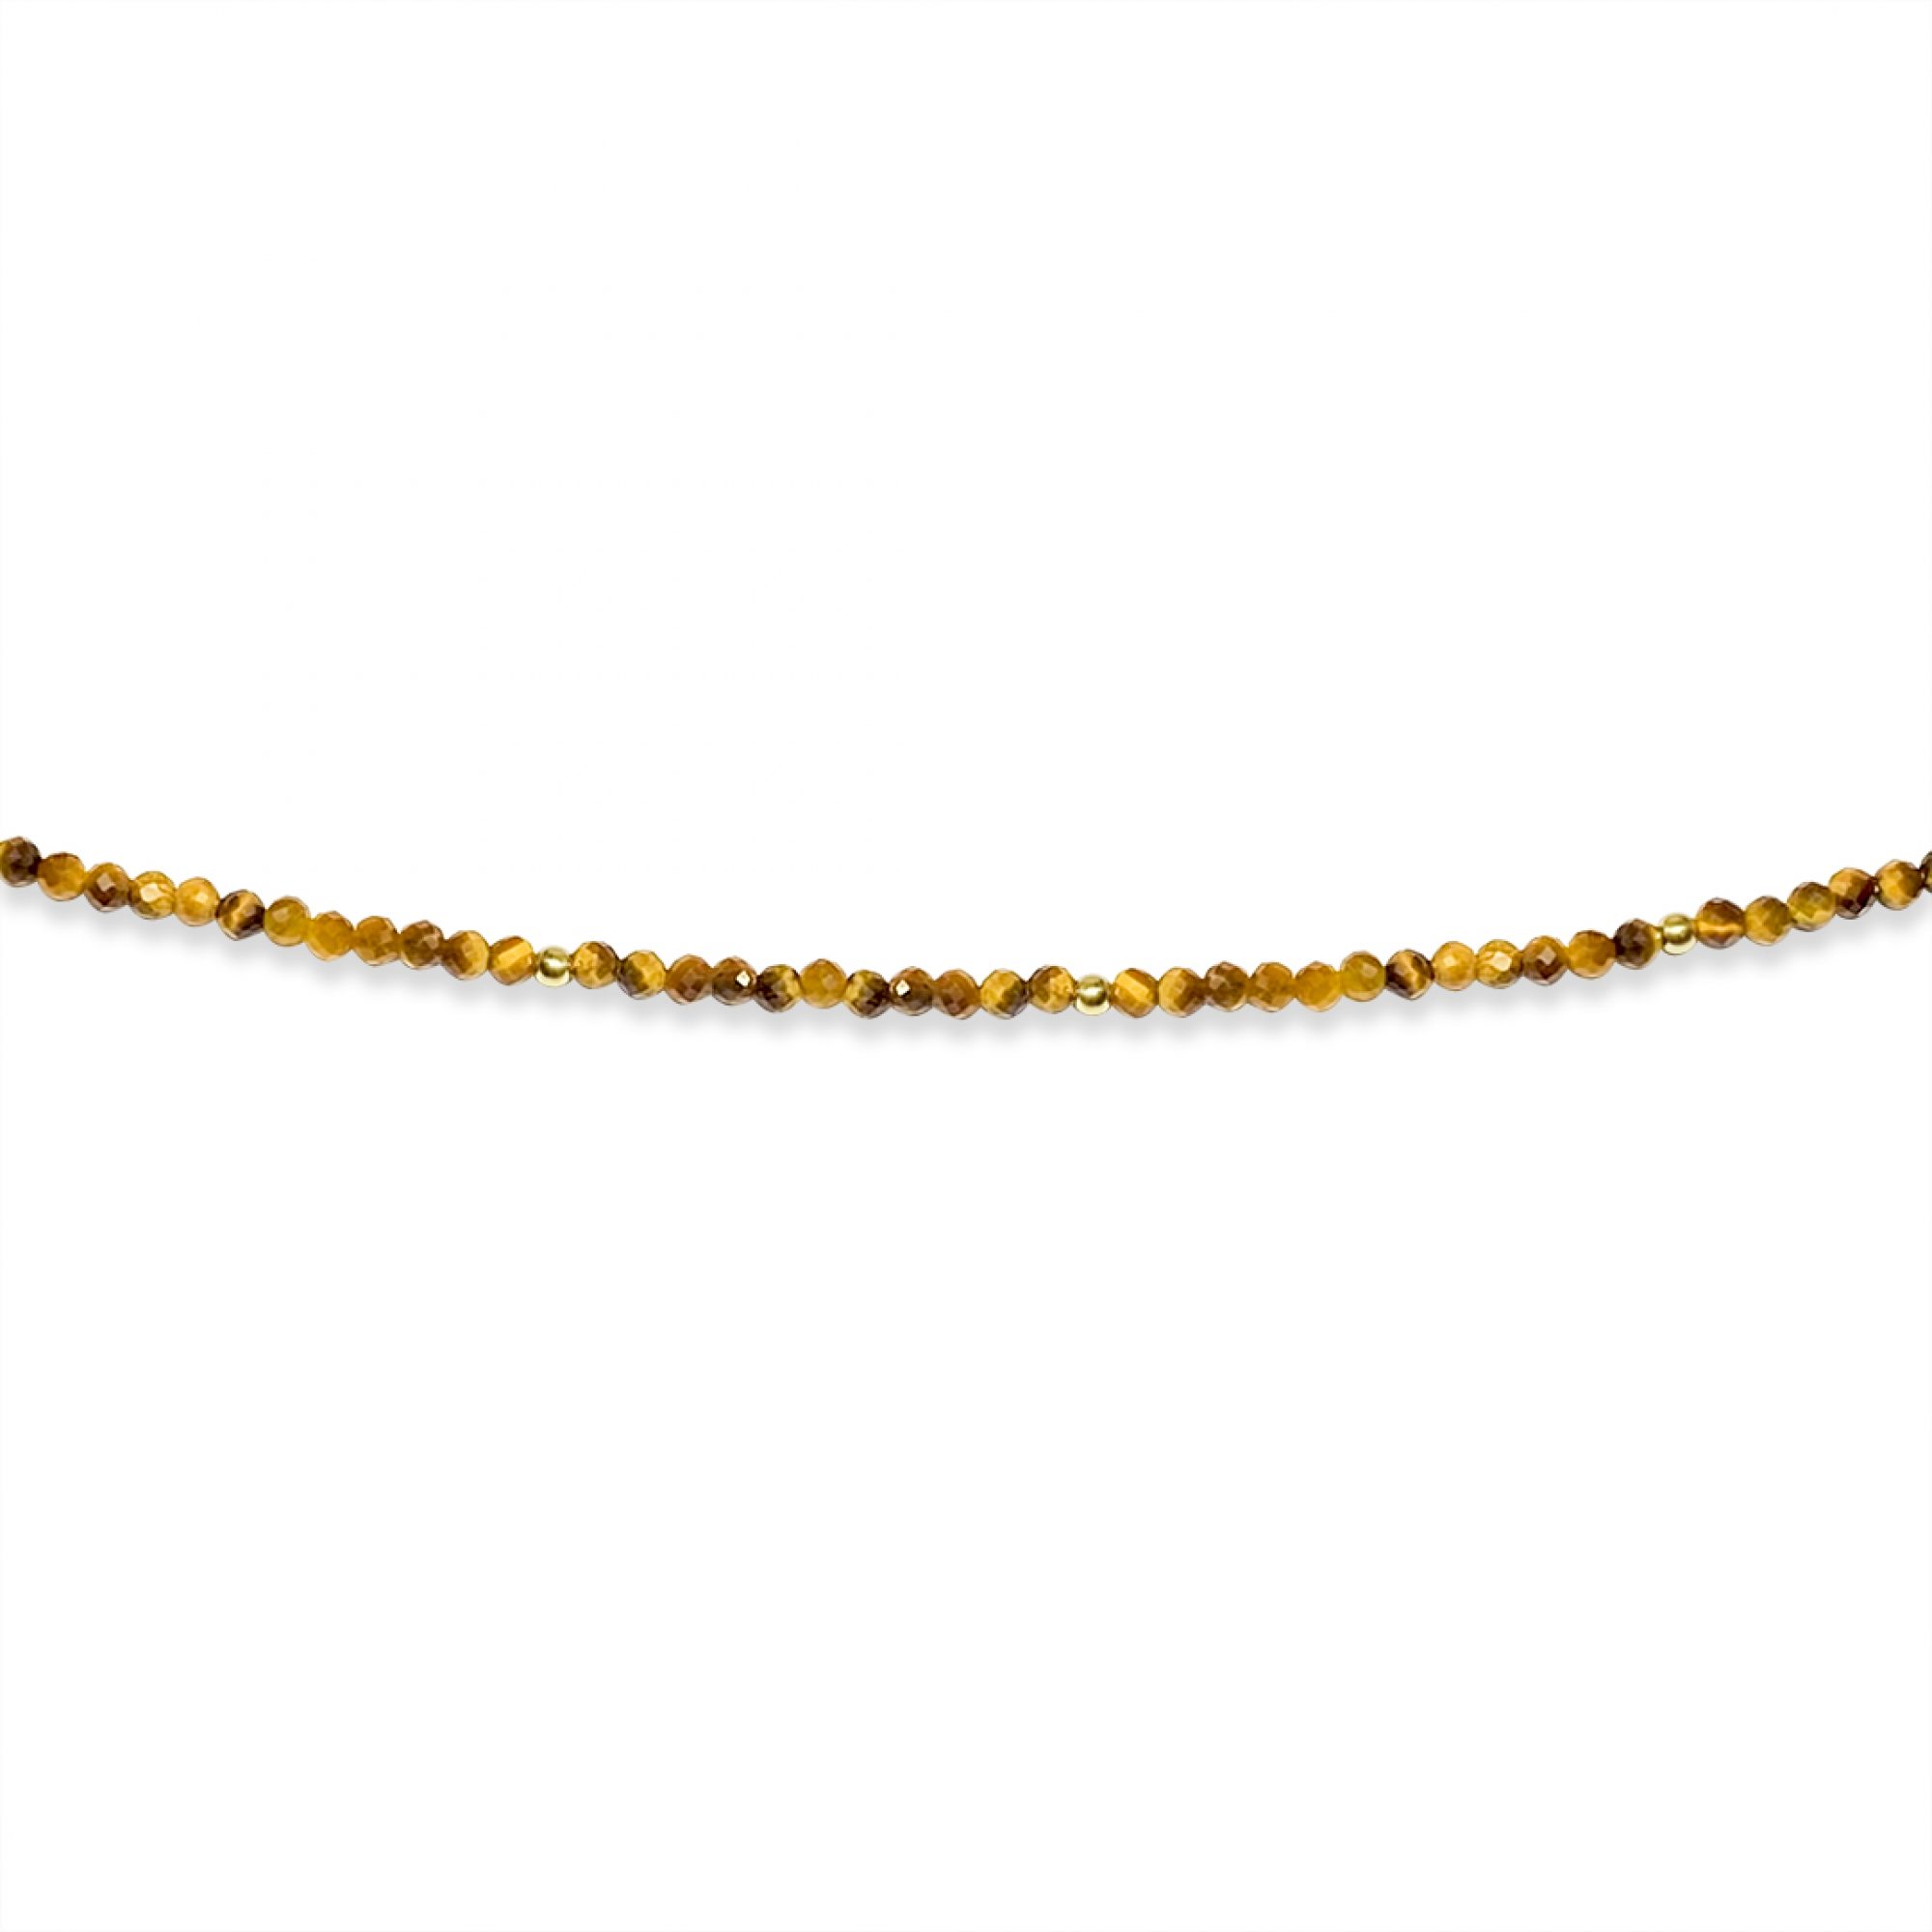 Gold plated anklet with eye of the tiger beads